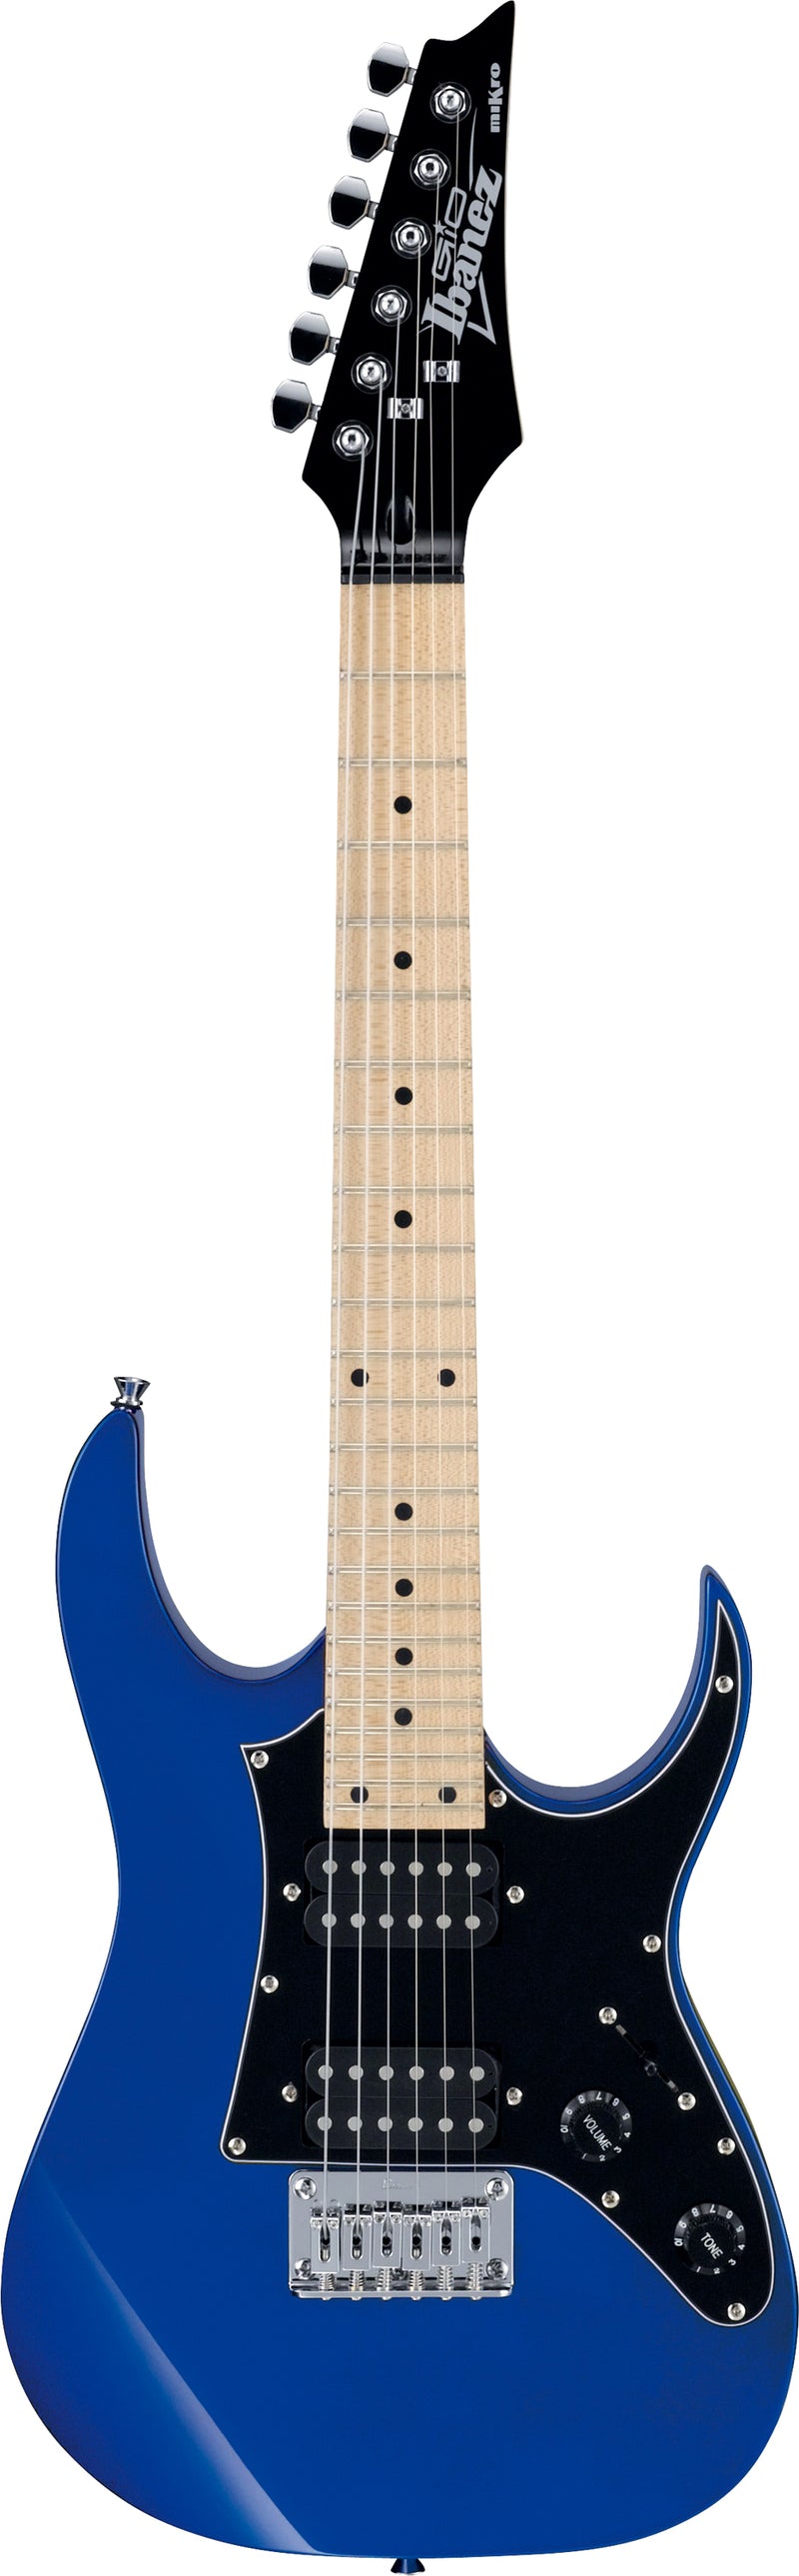 Ibanez GIO RG MIKRO Series Short Scale Electric Guitar (Jewel Blue)